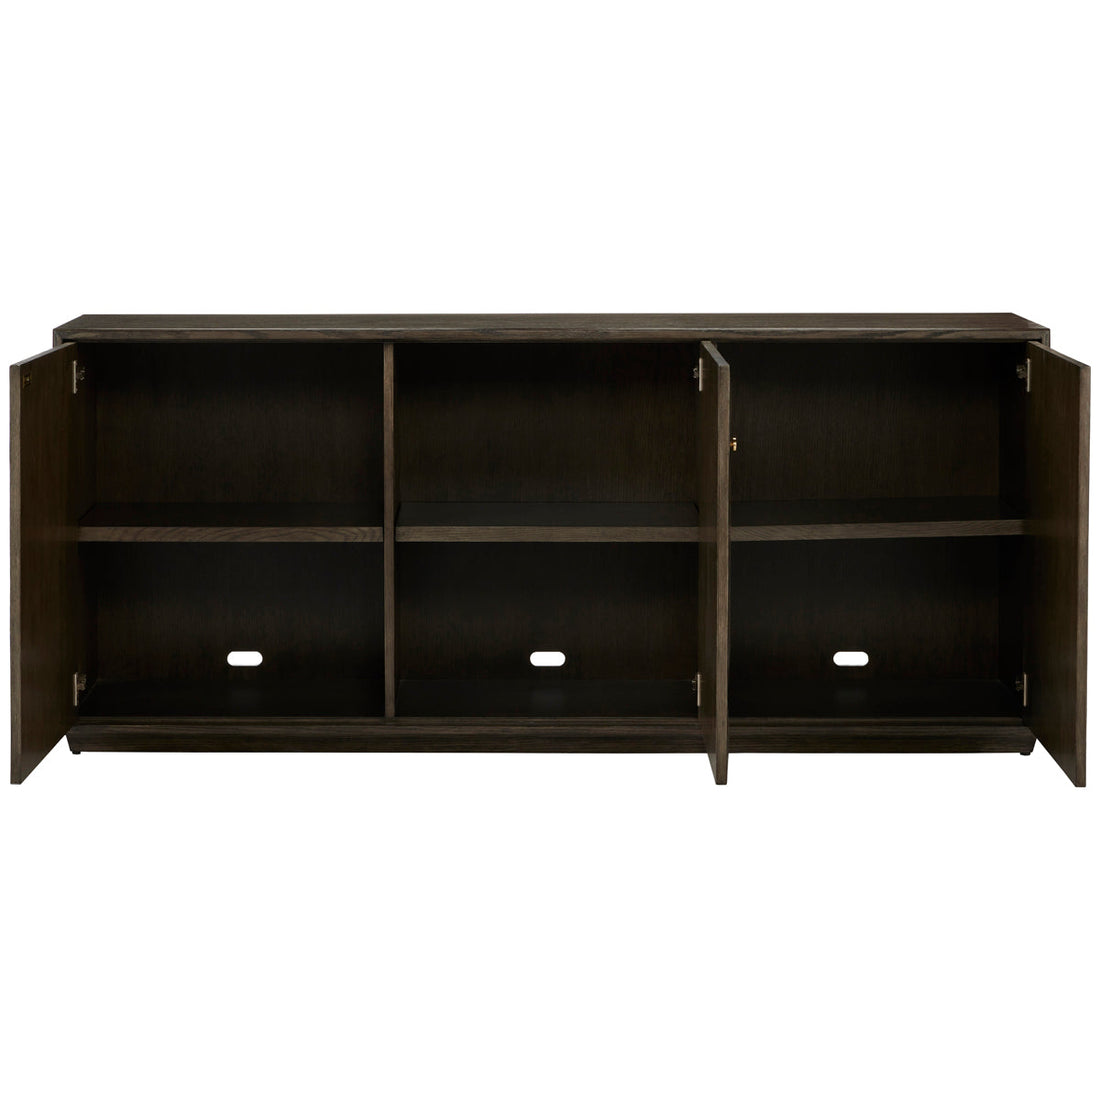 Currey and Company Kendall Credenza